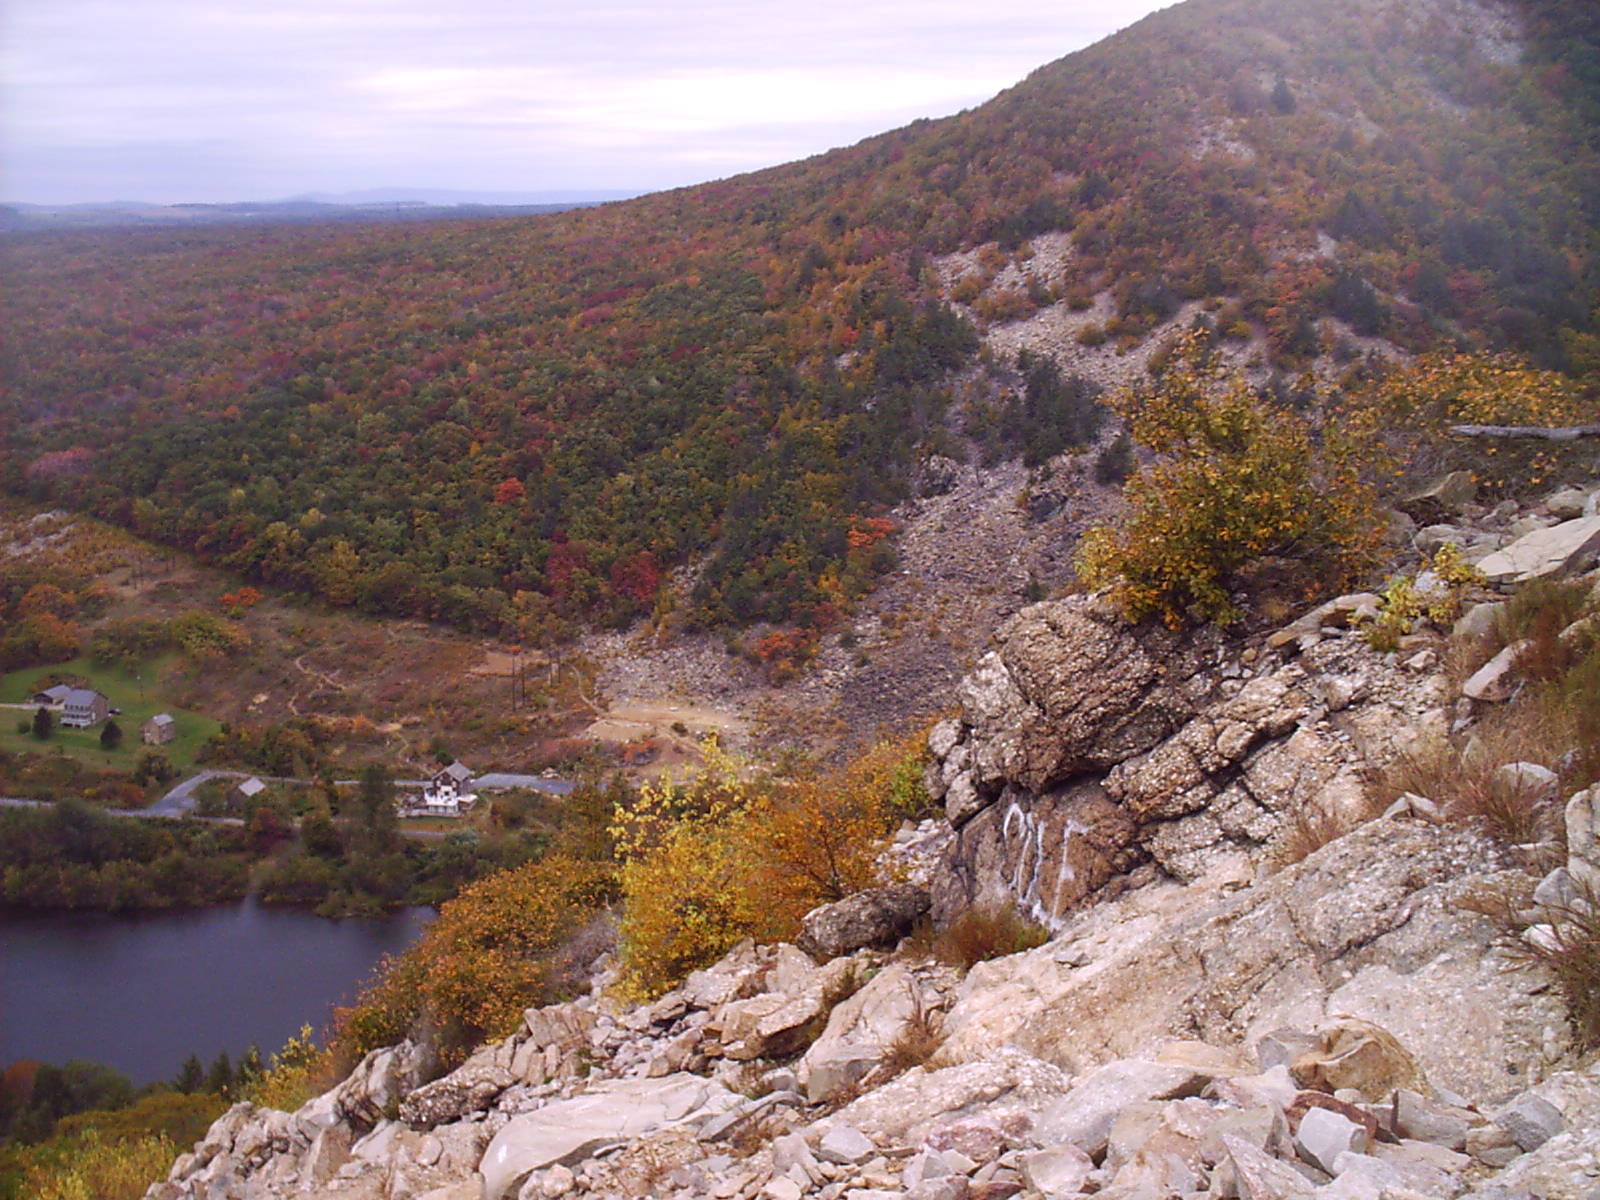 View of Lehigh Gap. Courtesy at@rohland.org